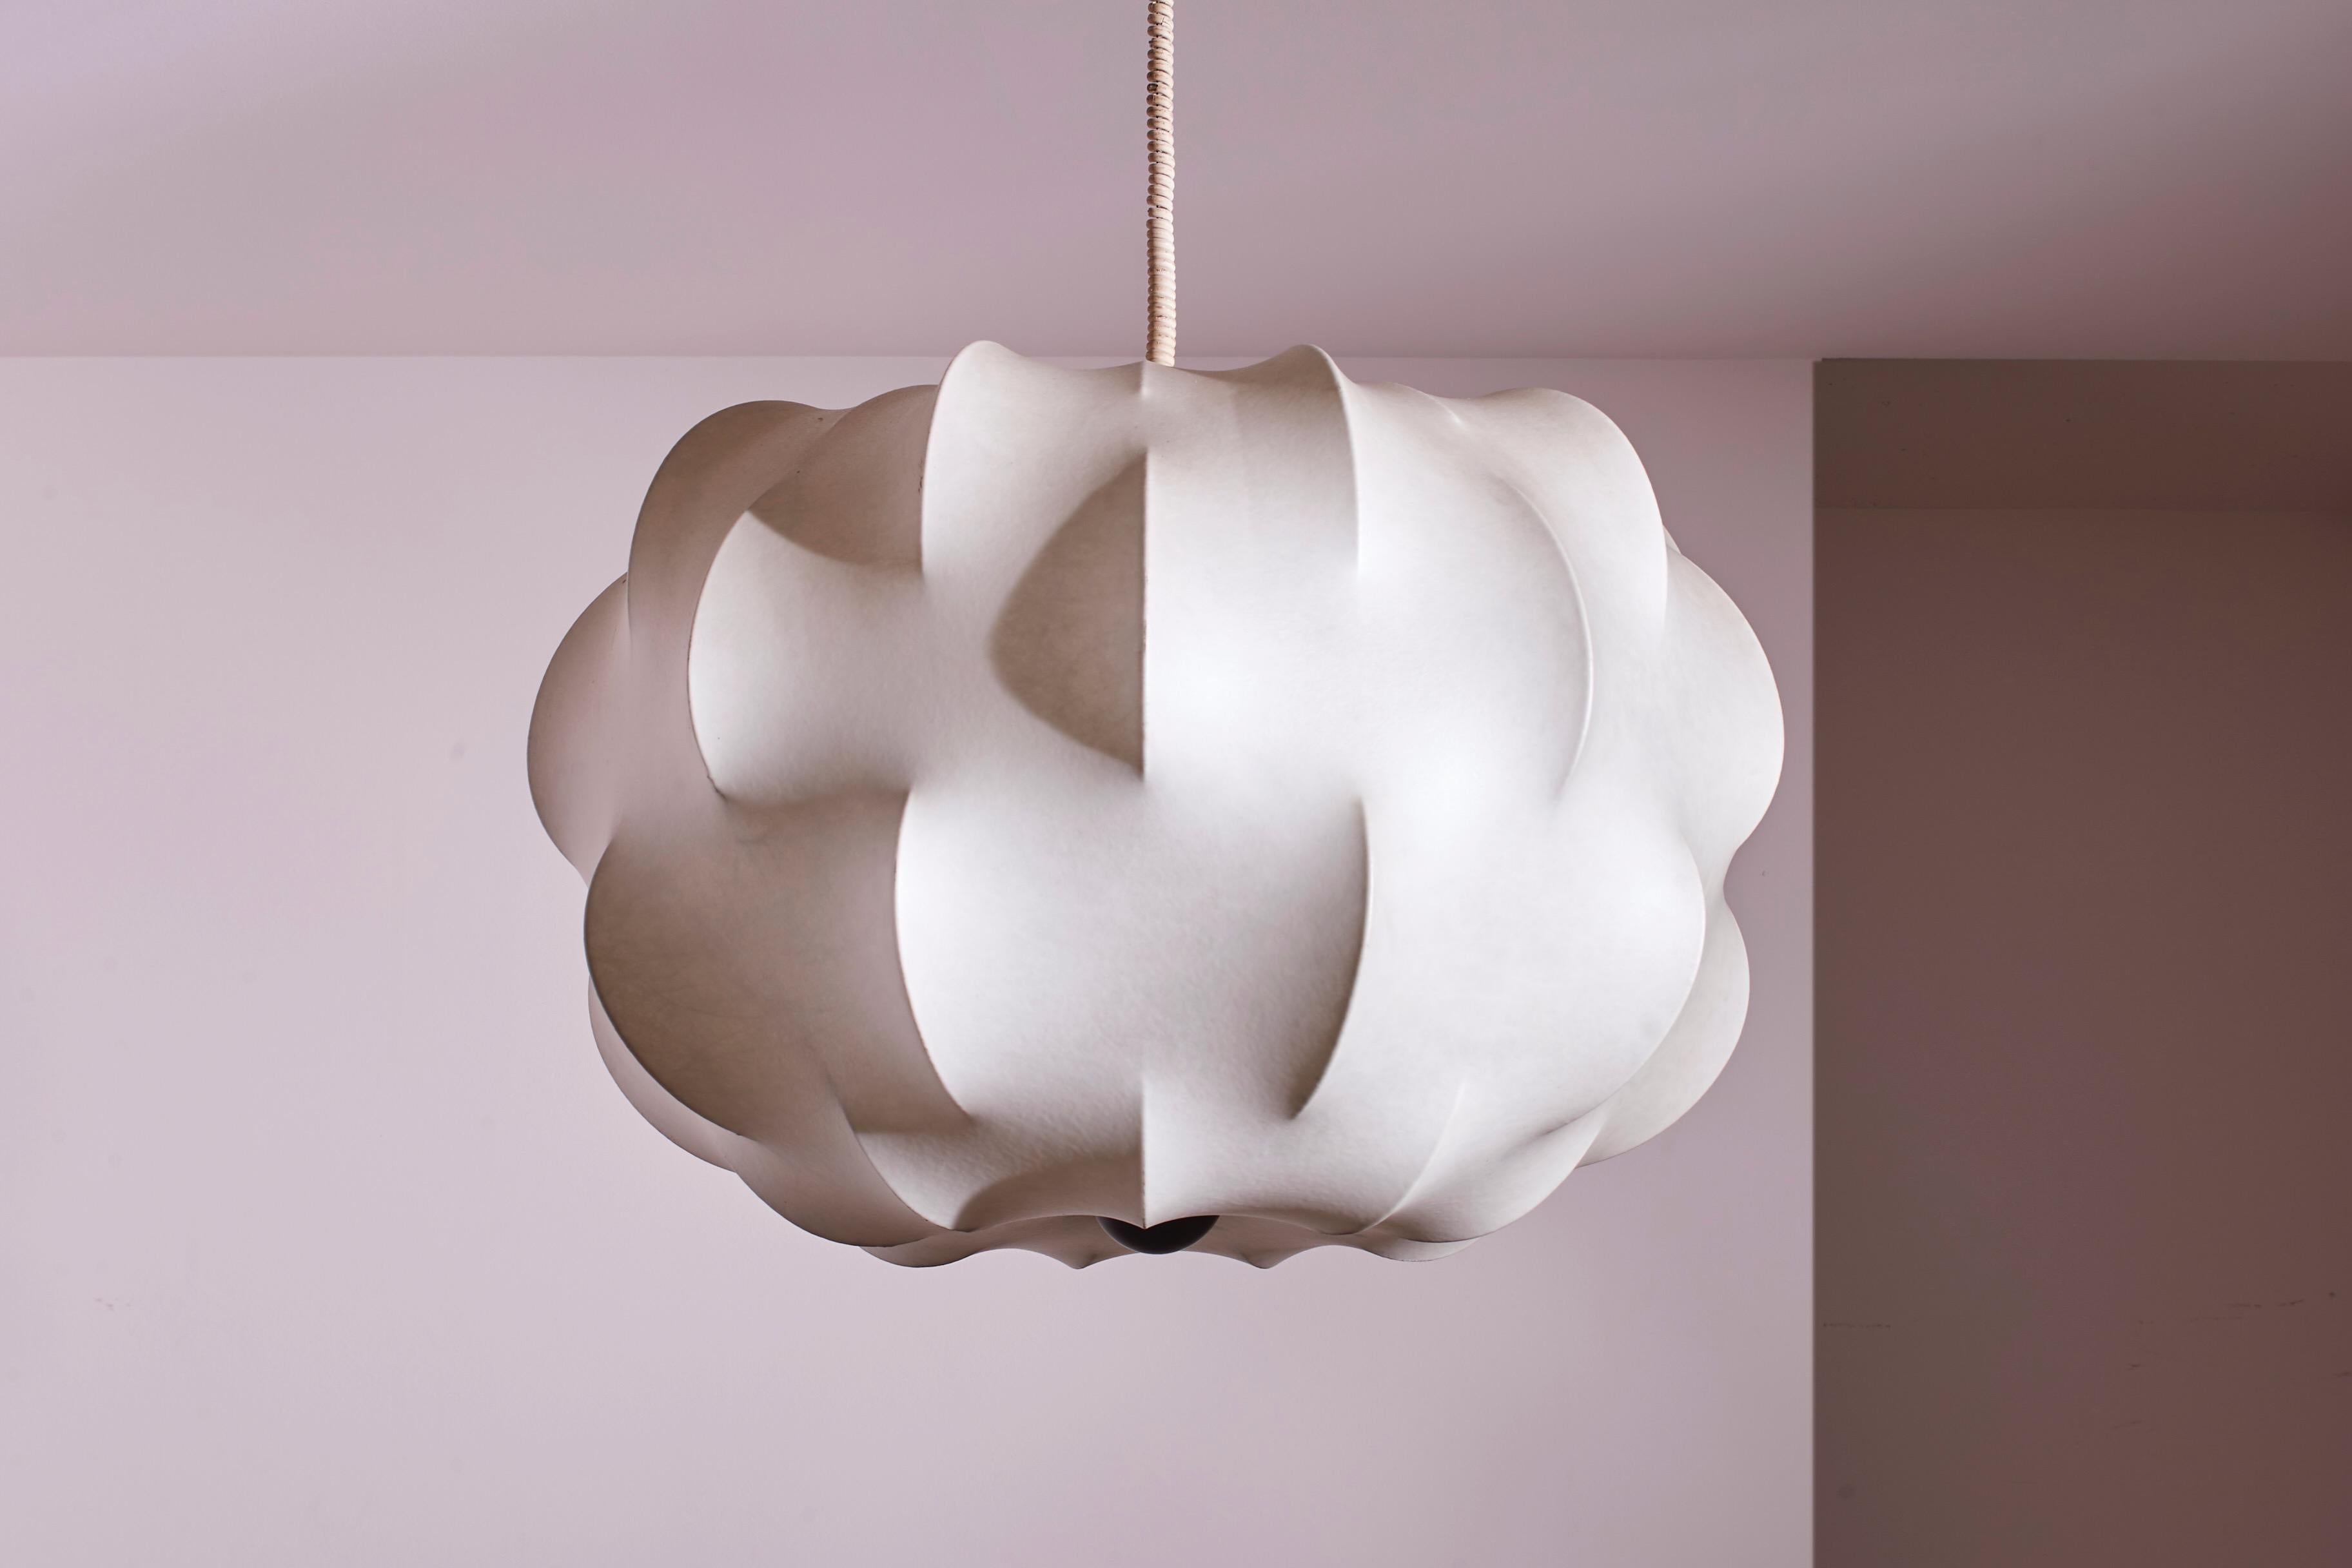 A large cocoon Nuvola chandelier by Tobia Scarpa for Flos designed in the 1962 and crafted in the early 1970s.

In the realm of mid-century modern design, few pieces encapsulate the era's essence quite like the Nuvola pendant light by Tobia Scarpa